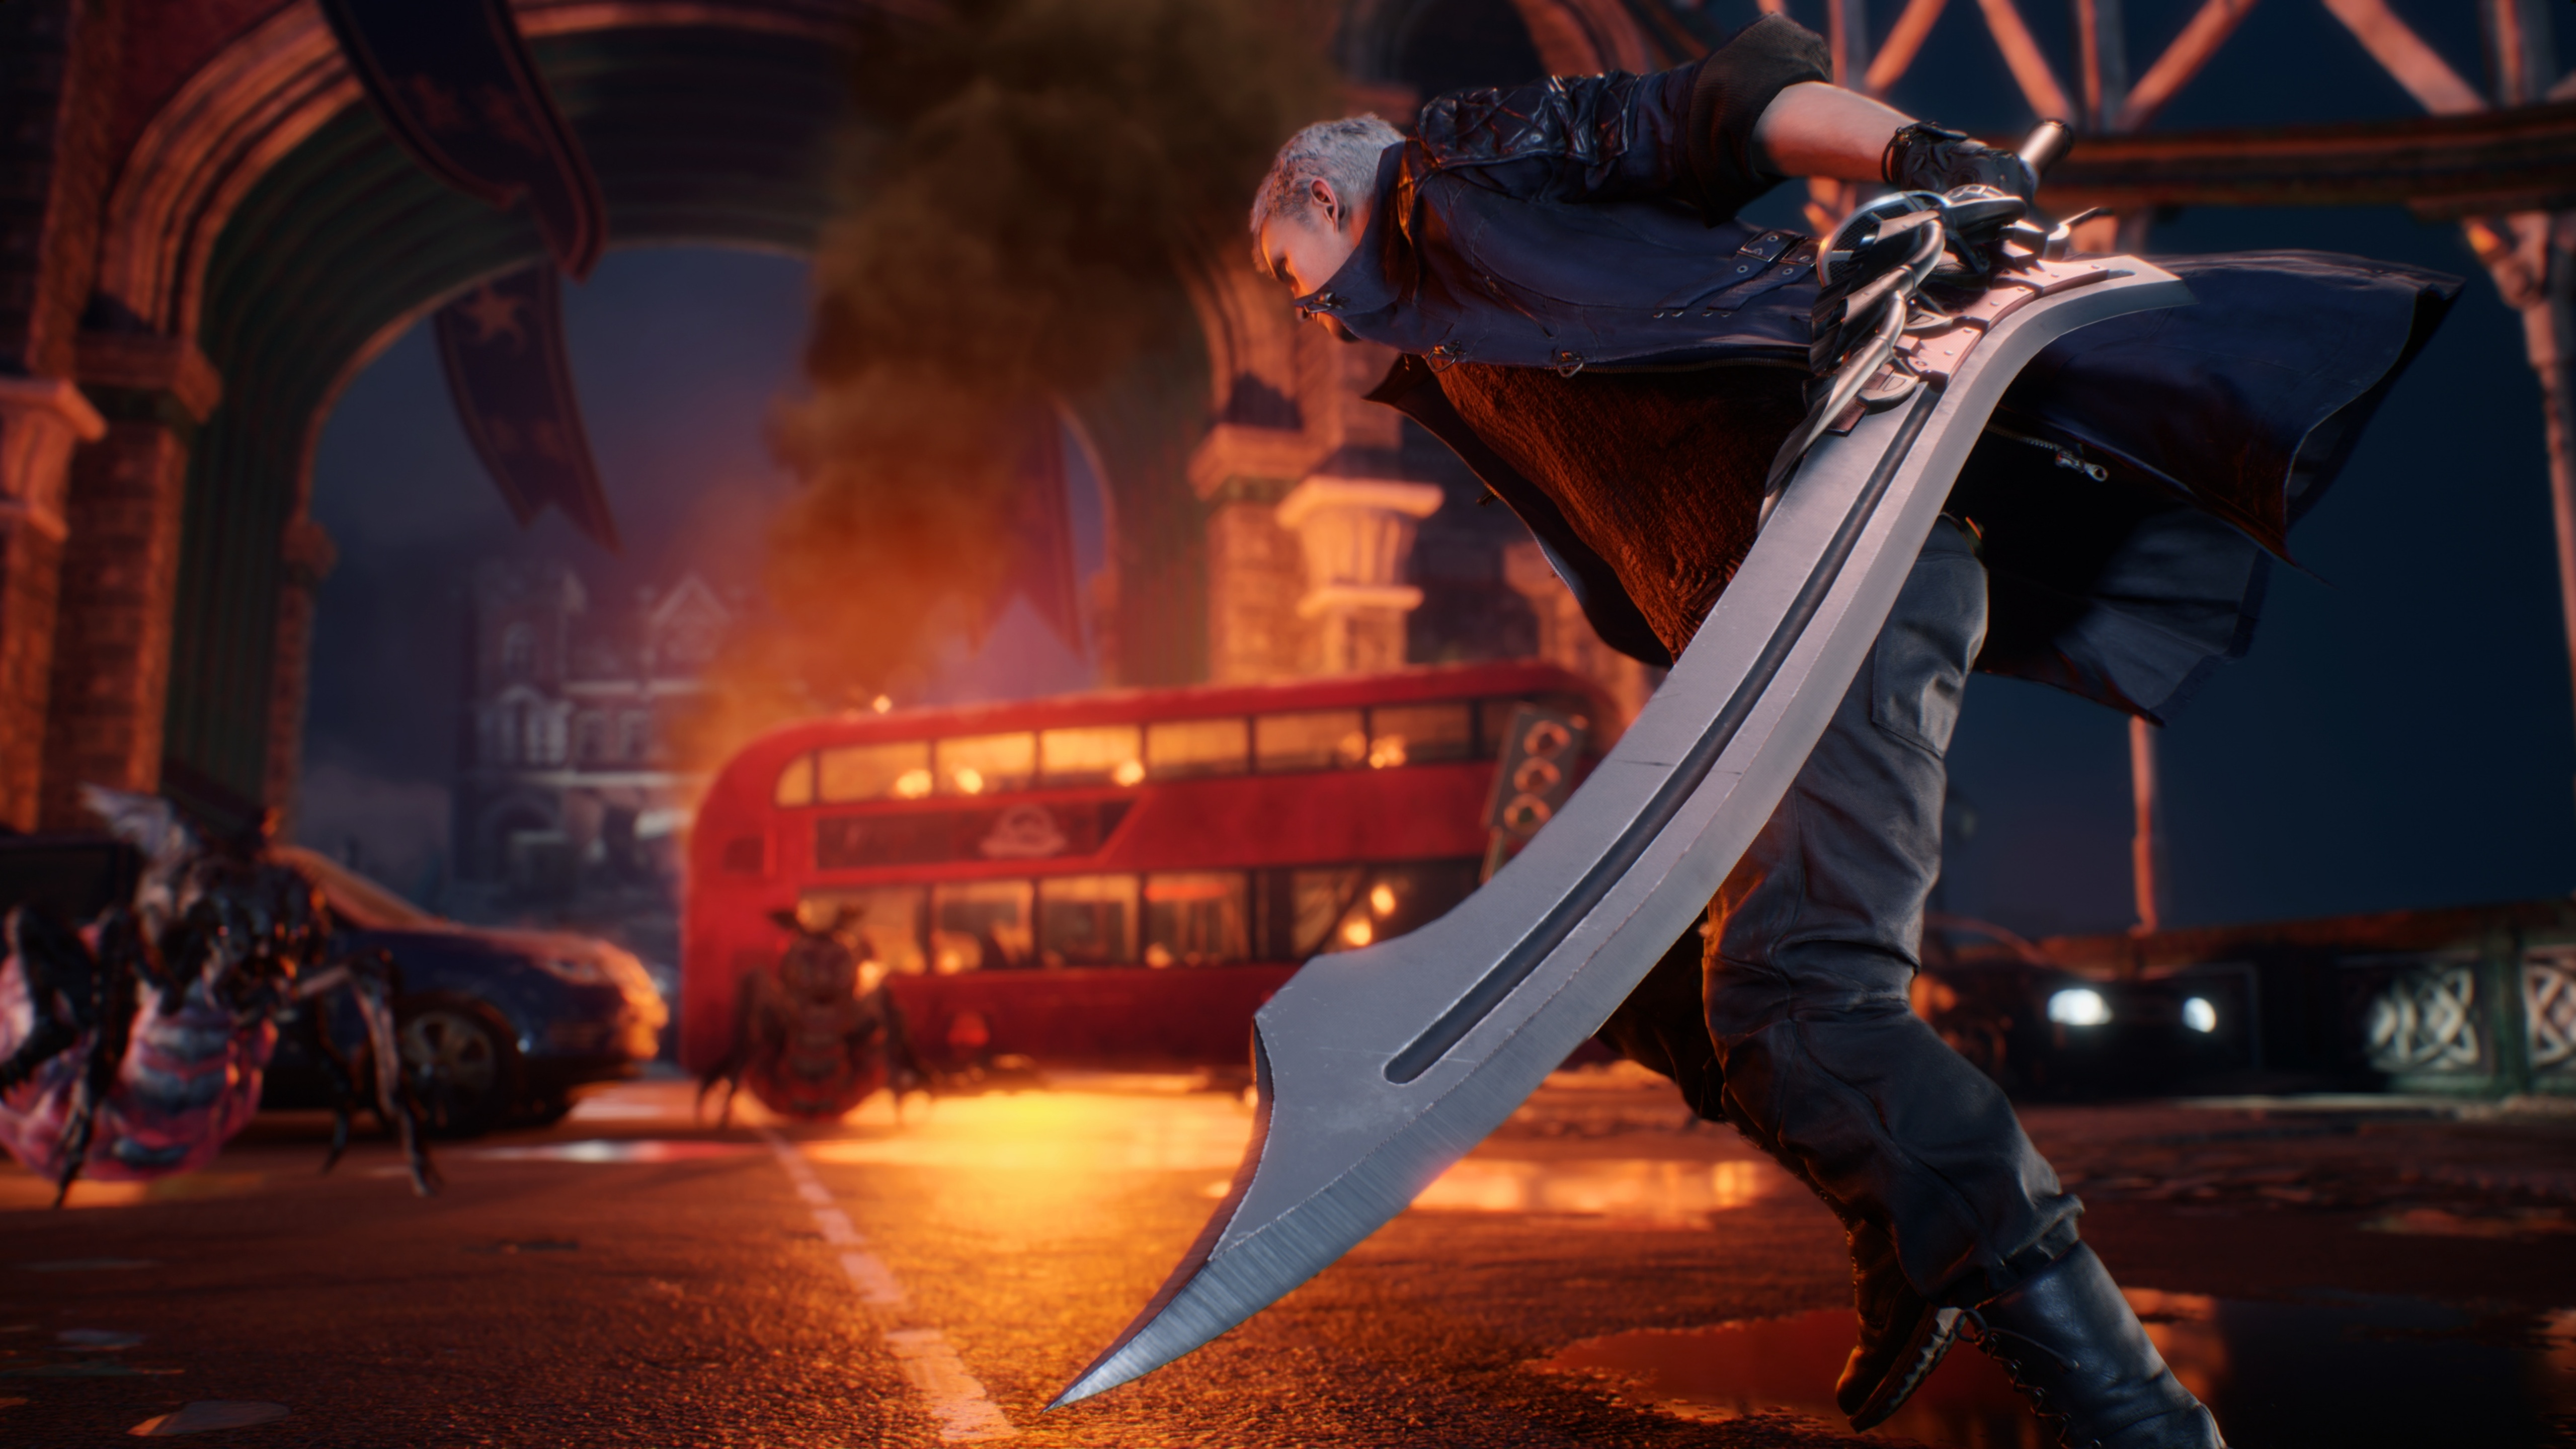 Devil May Cry 5 Wallpaper 4k Hacking Bridge - Devil May Cry 5 Red Queen , HD Wallpaper & Backgrounds